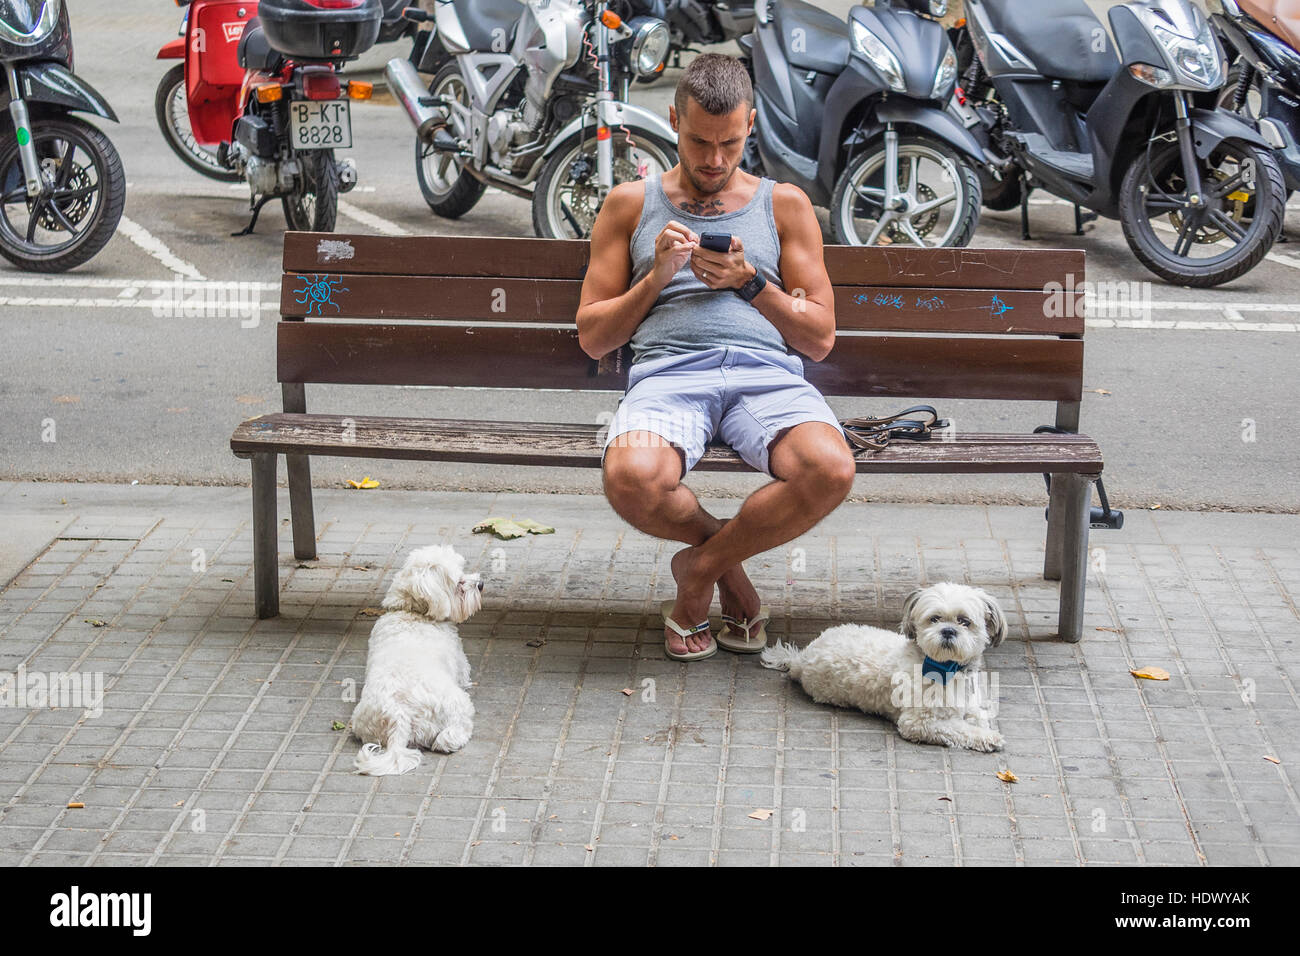 A 20s Spanish male sits on a city bench on a sidewalk checking his smartphone with two white dogs in Barcelona, Spain. Stock Photo